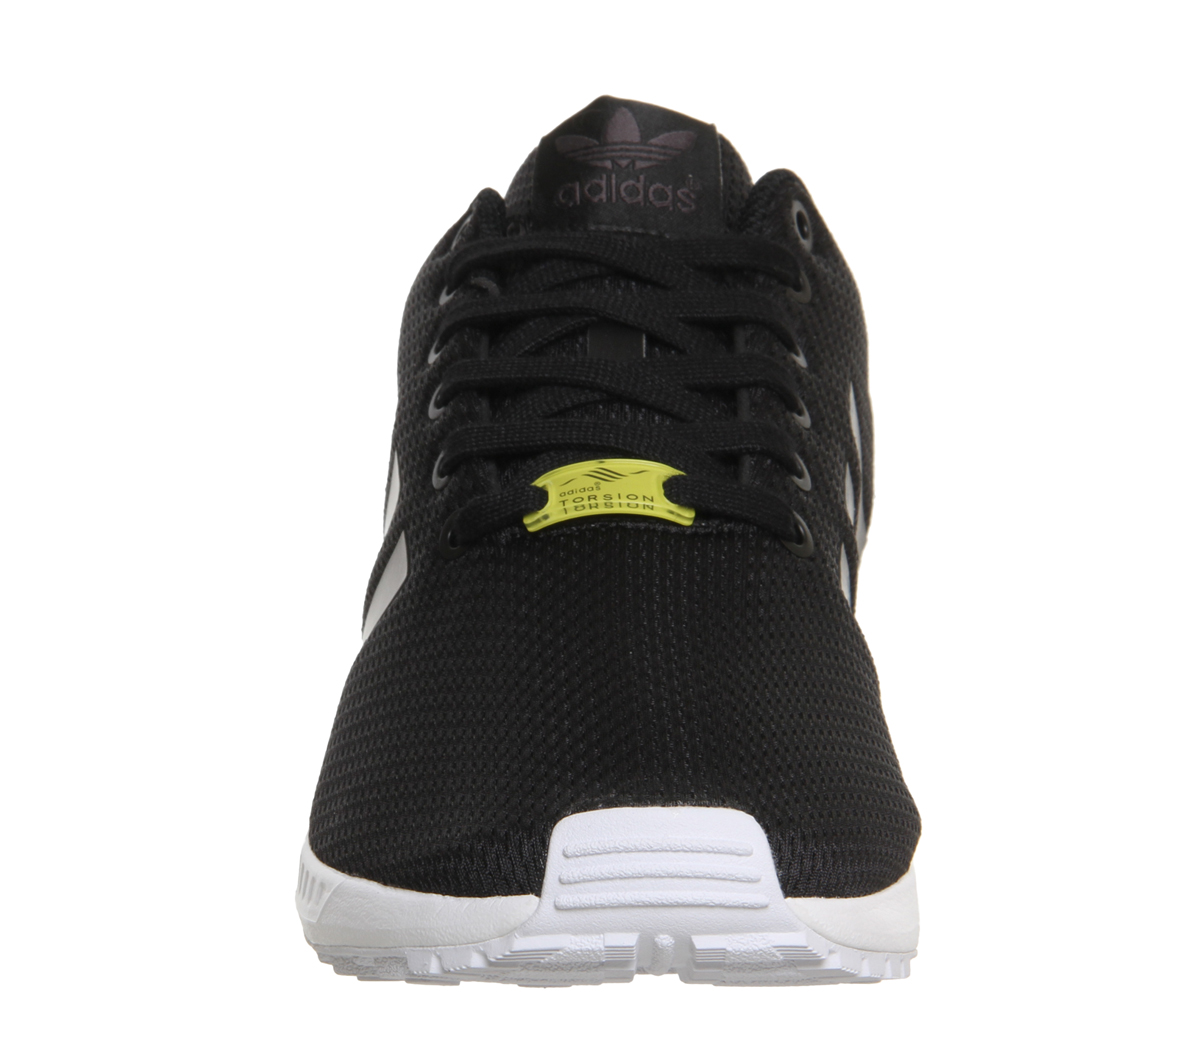 adidas flux black and gold mens